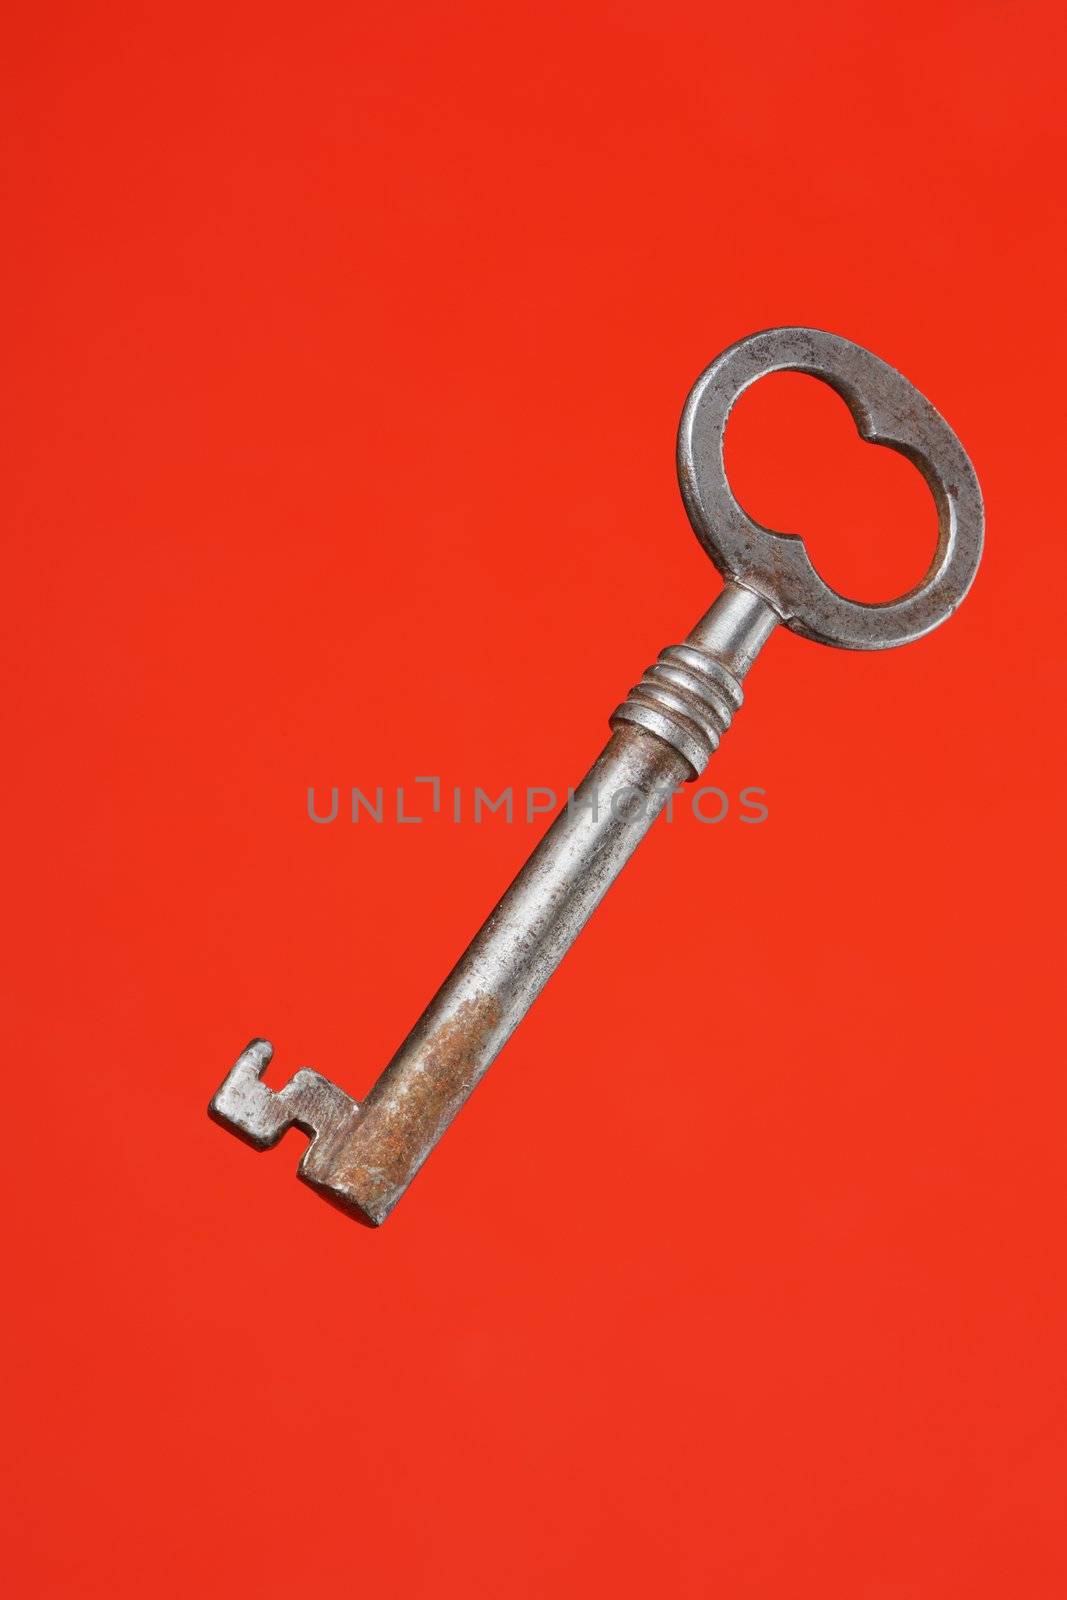 Old metallic key on red background